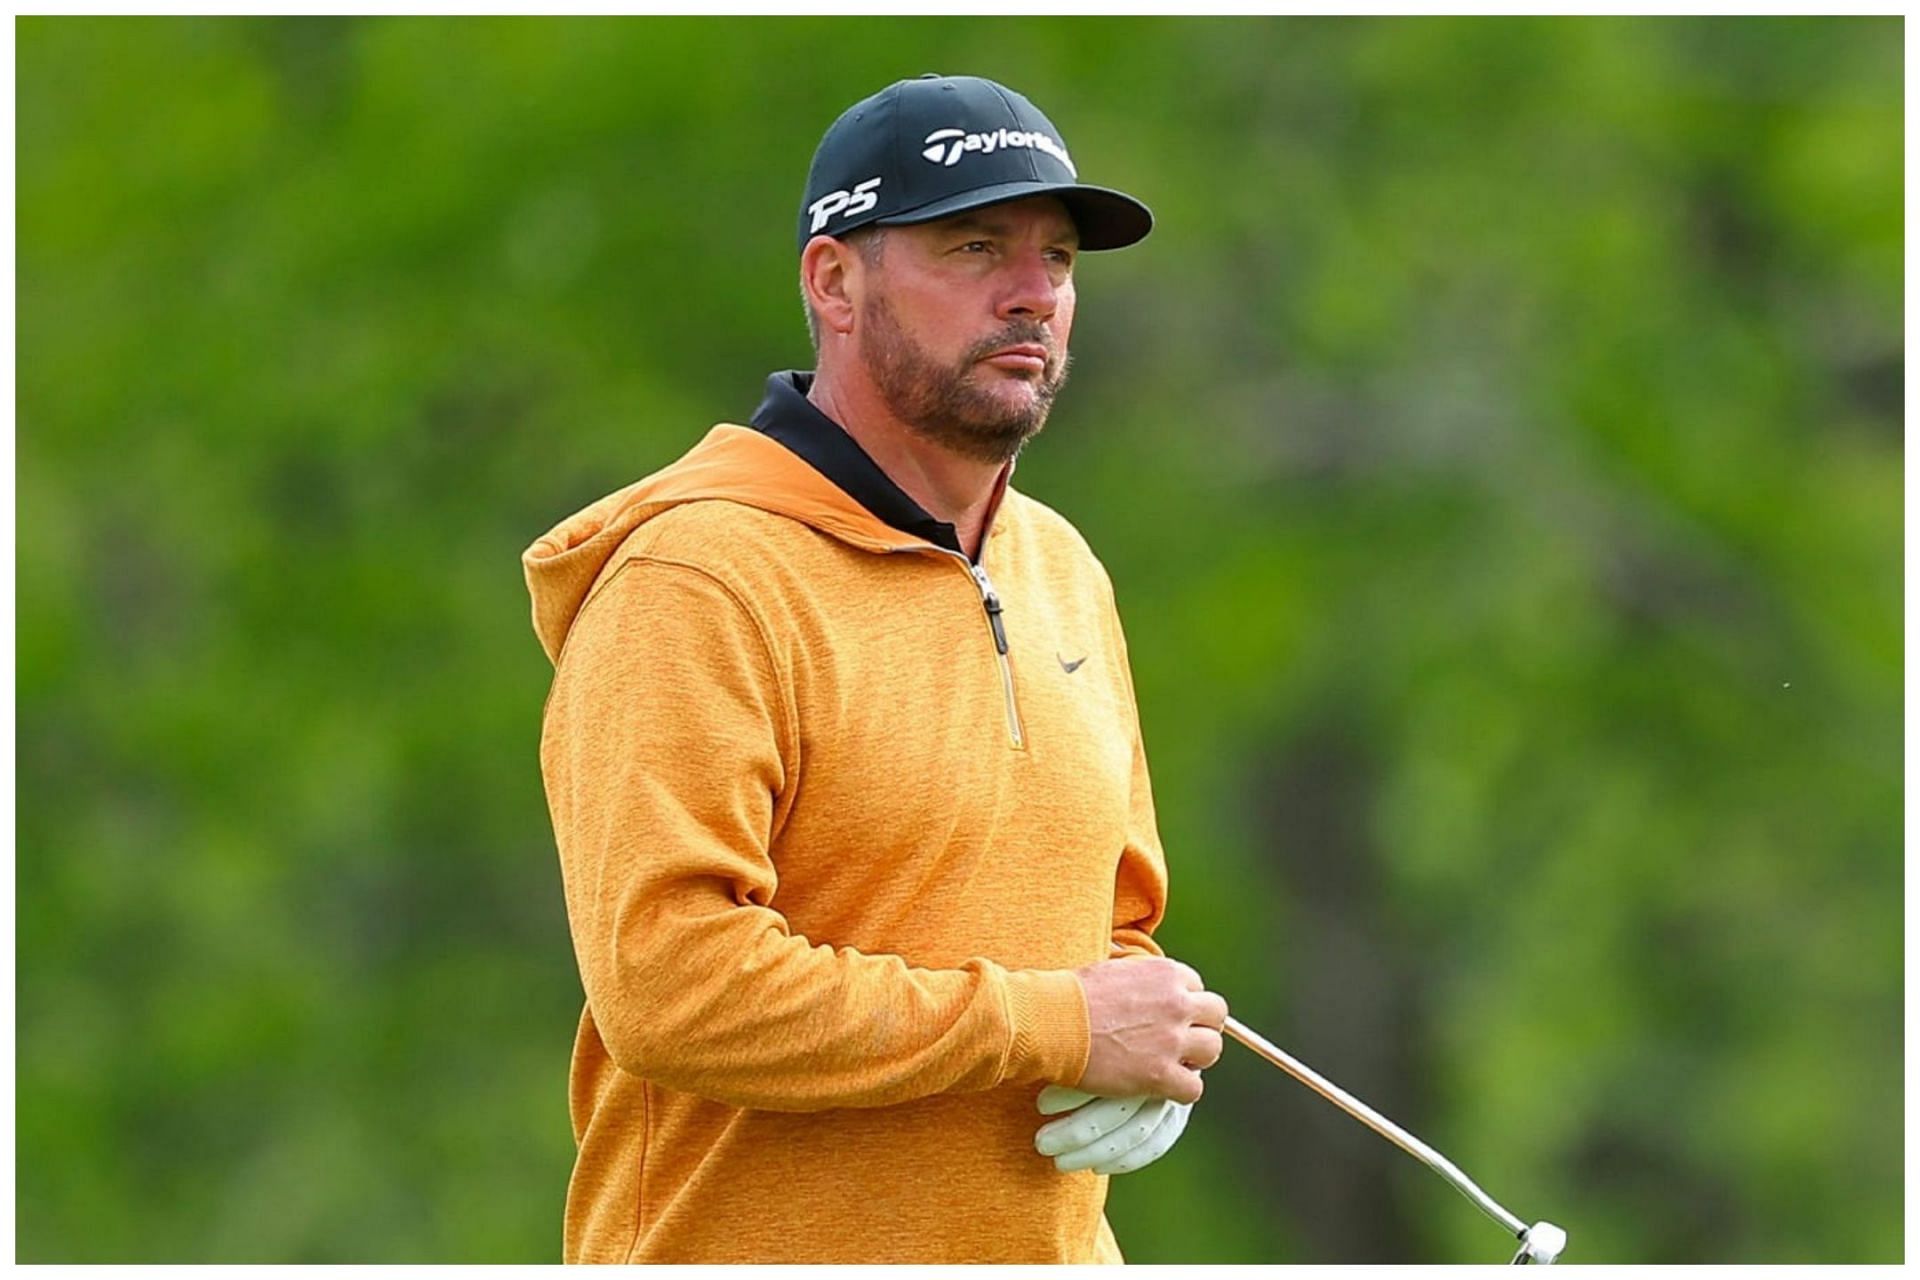 Michael Block was last seen competing at the RBC Canadian Open